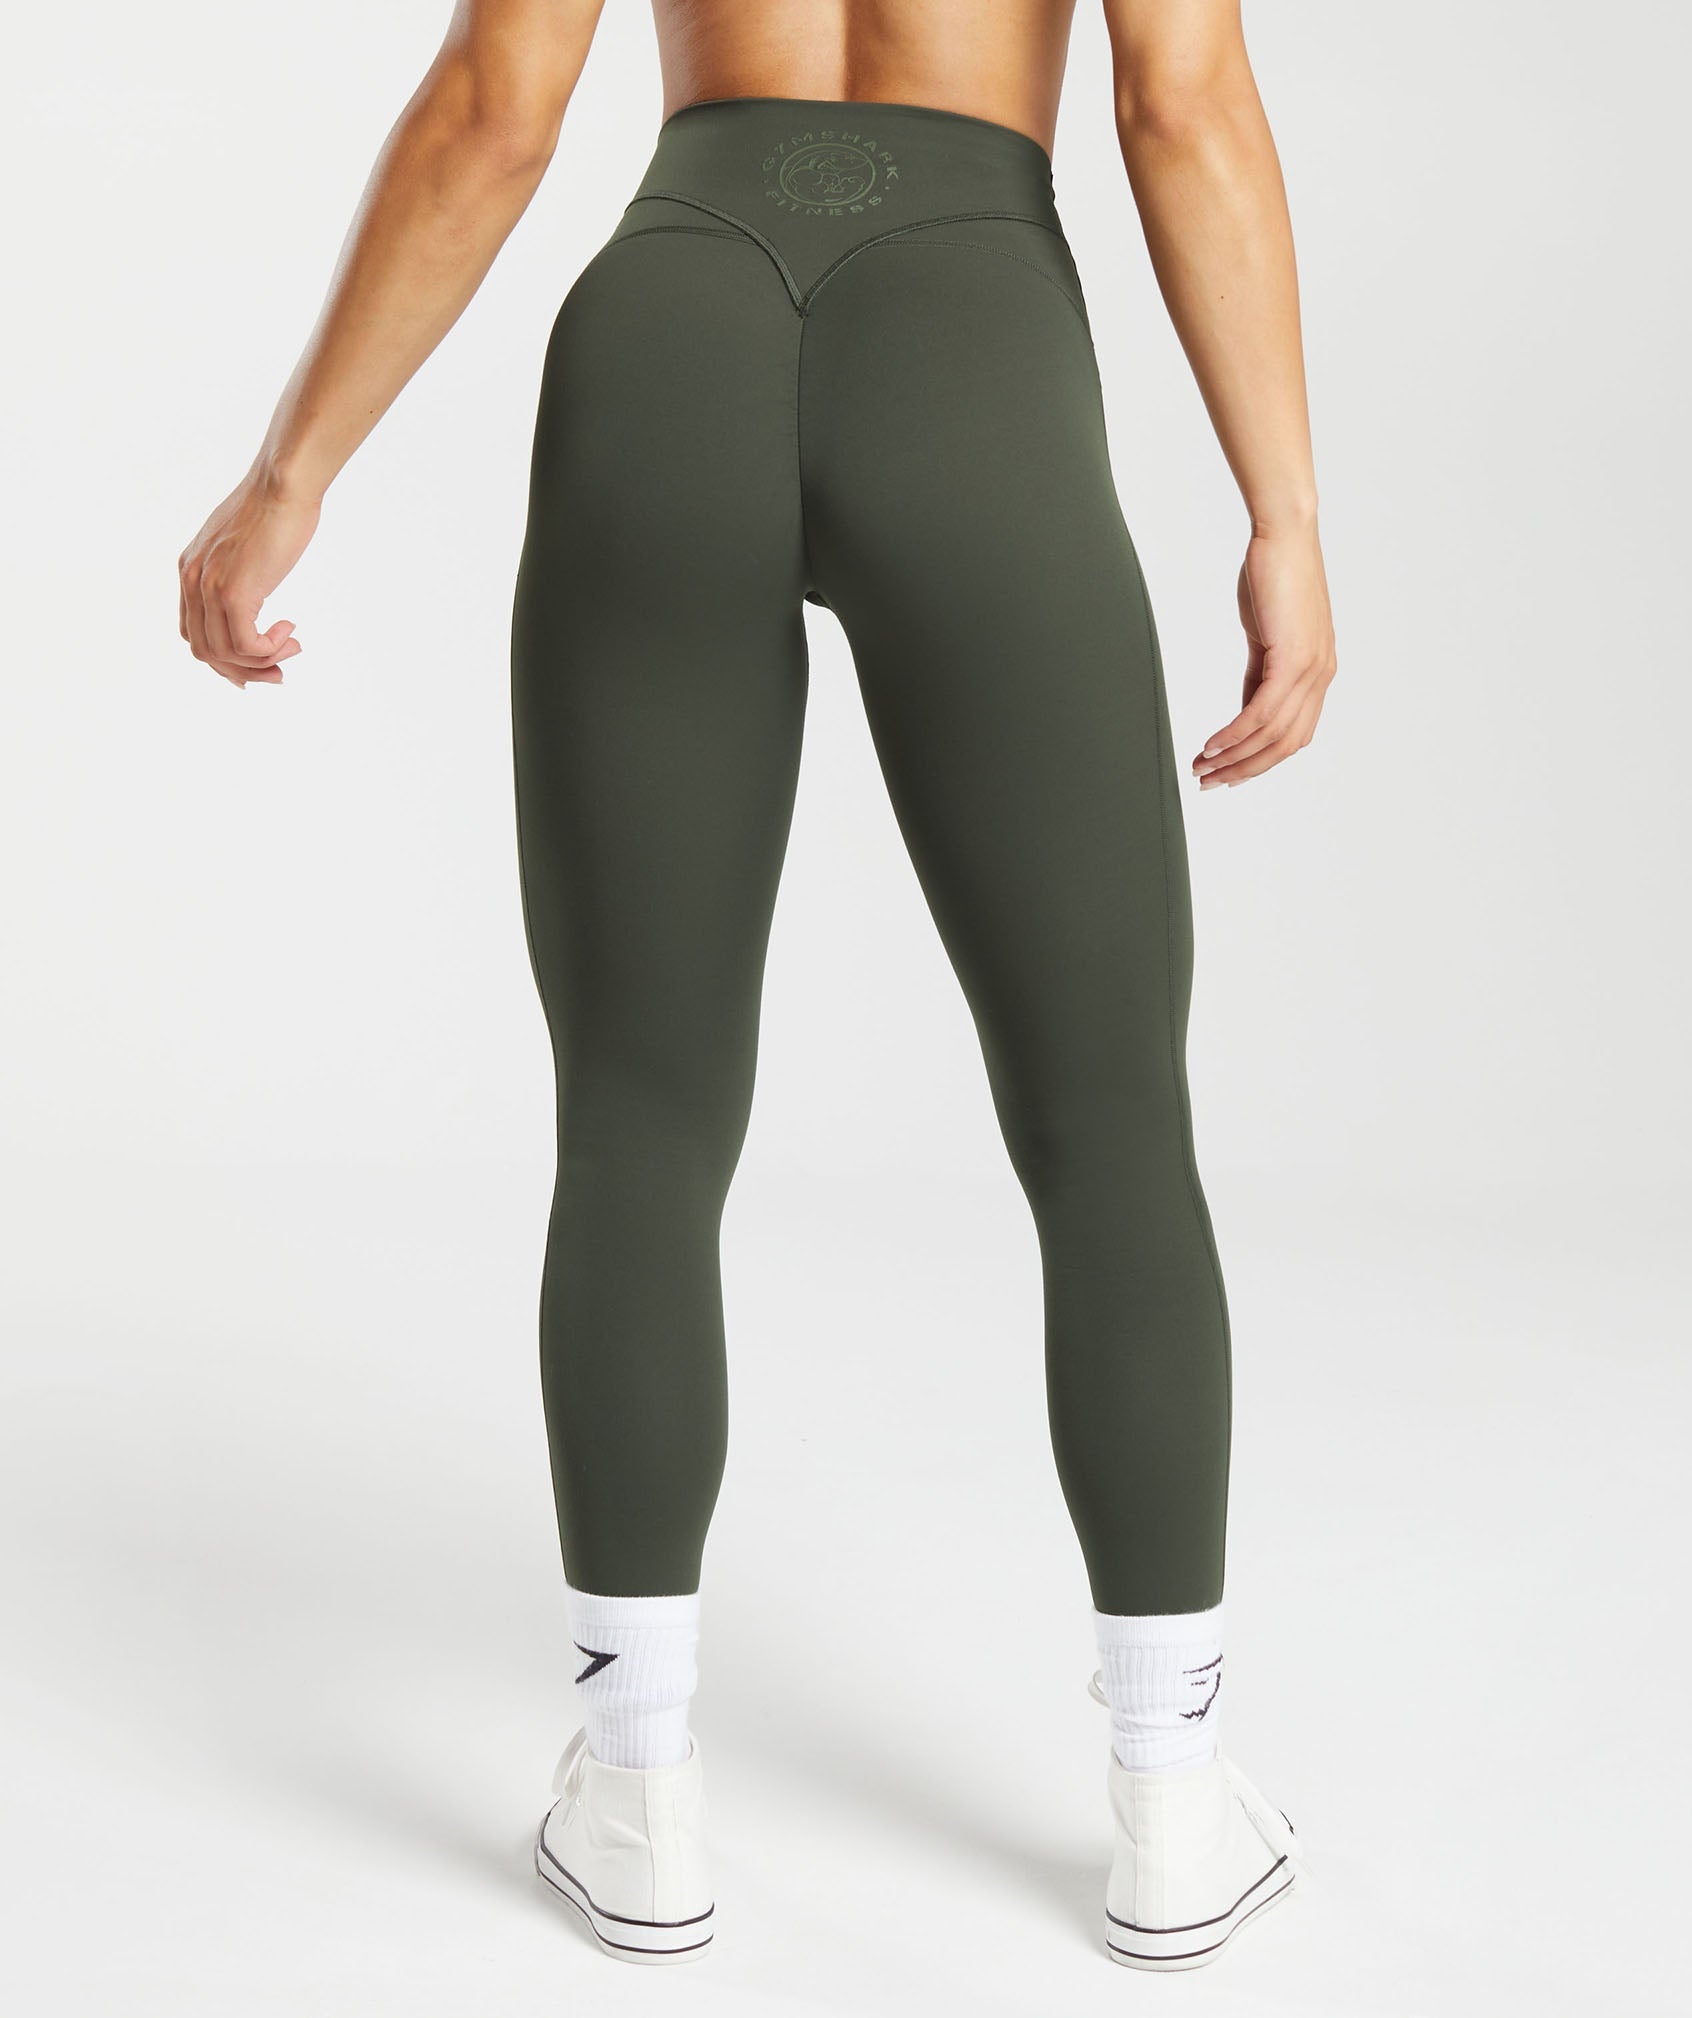 Exceptionally Stylish Crack Leggings at Low Prices 